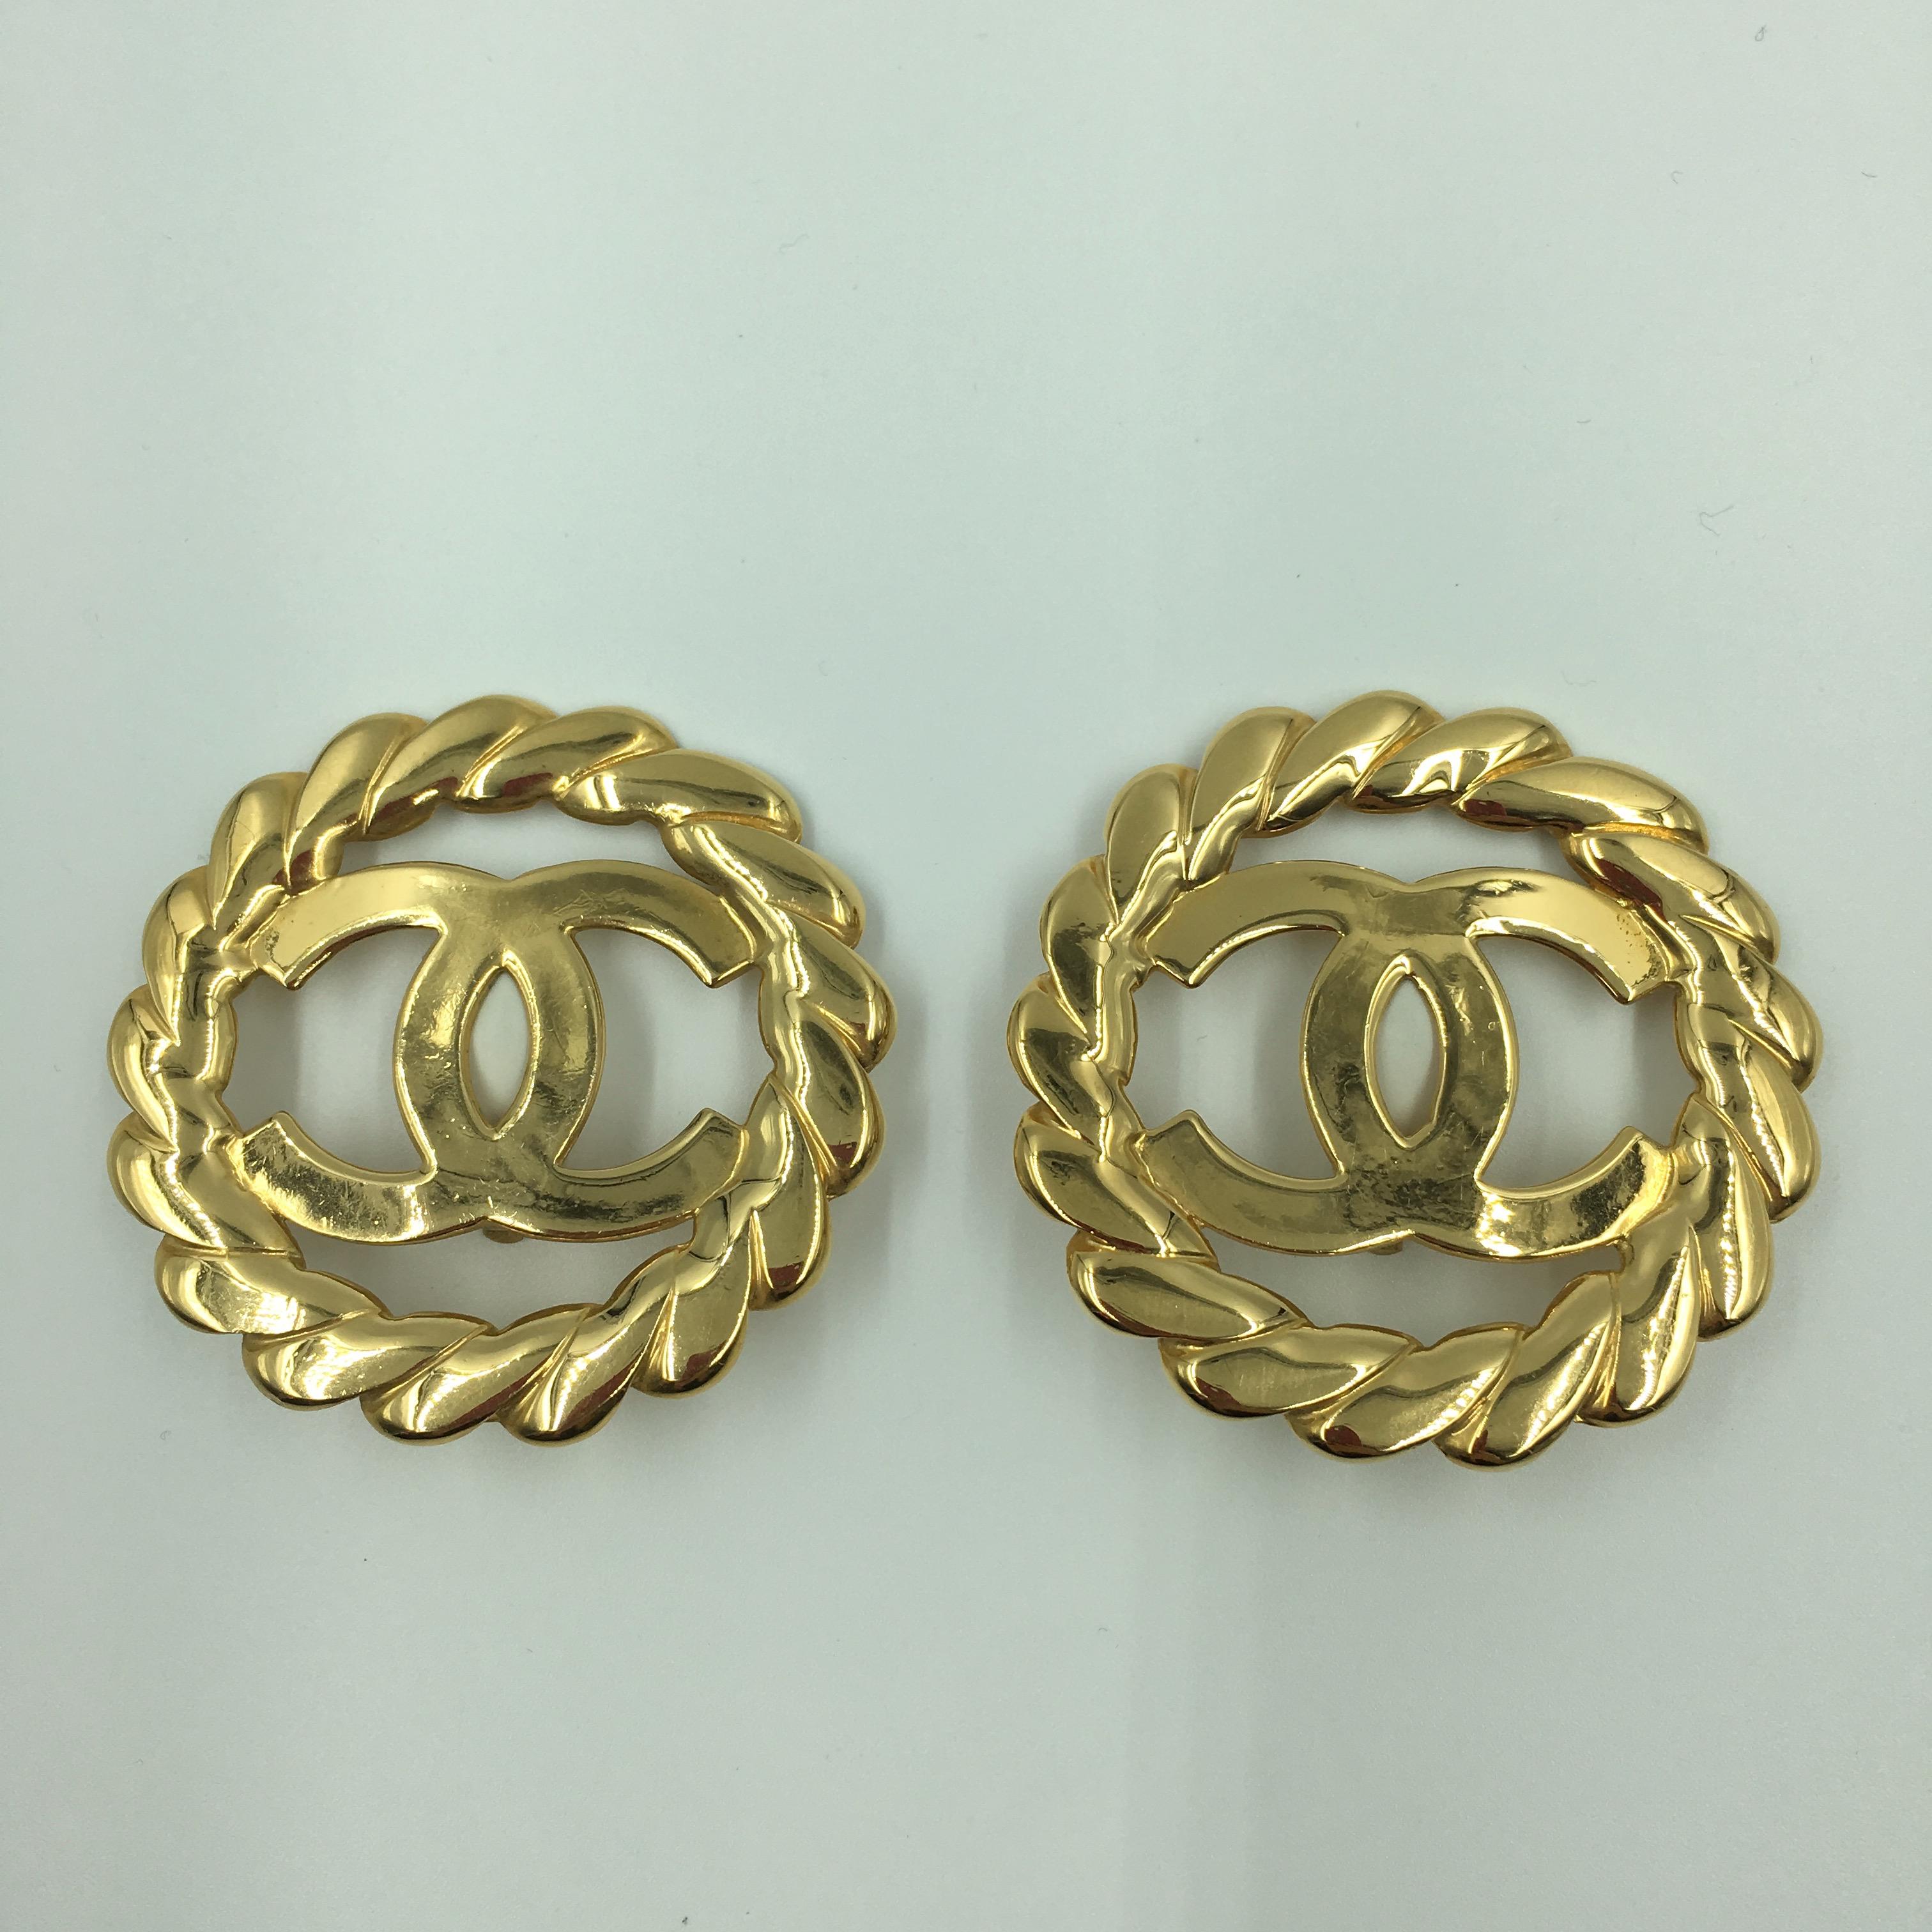 Chanel Gold Tone CC Logo/Chain Oversized Statement Clip On Earrings. Stamped Chanel on back. Stamped Made in France.
In good vintage condition.

Measurement are as follows:
Width- 2 1/4